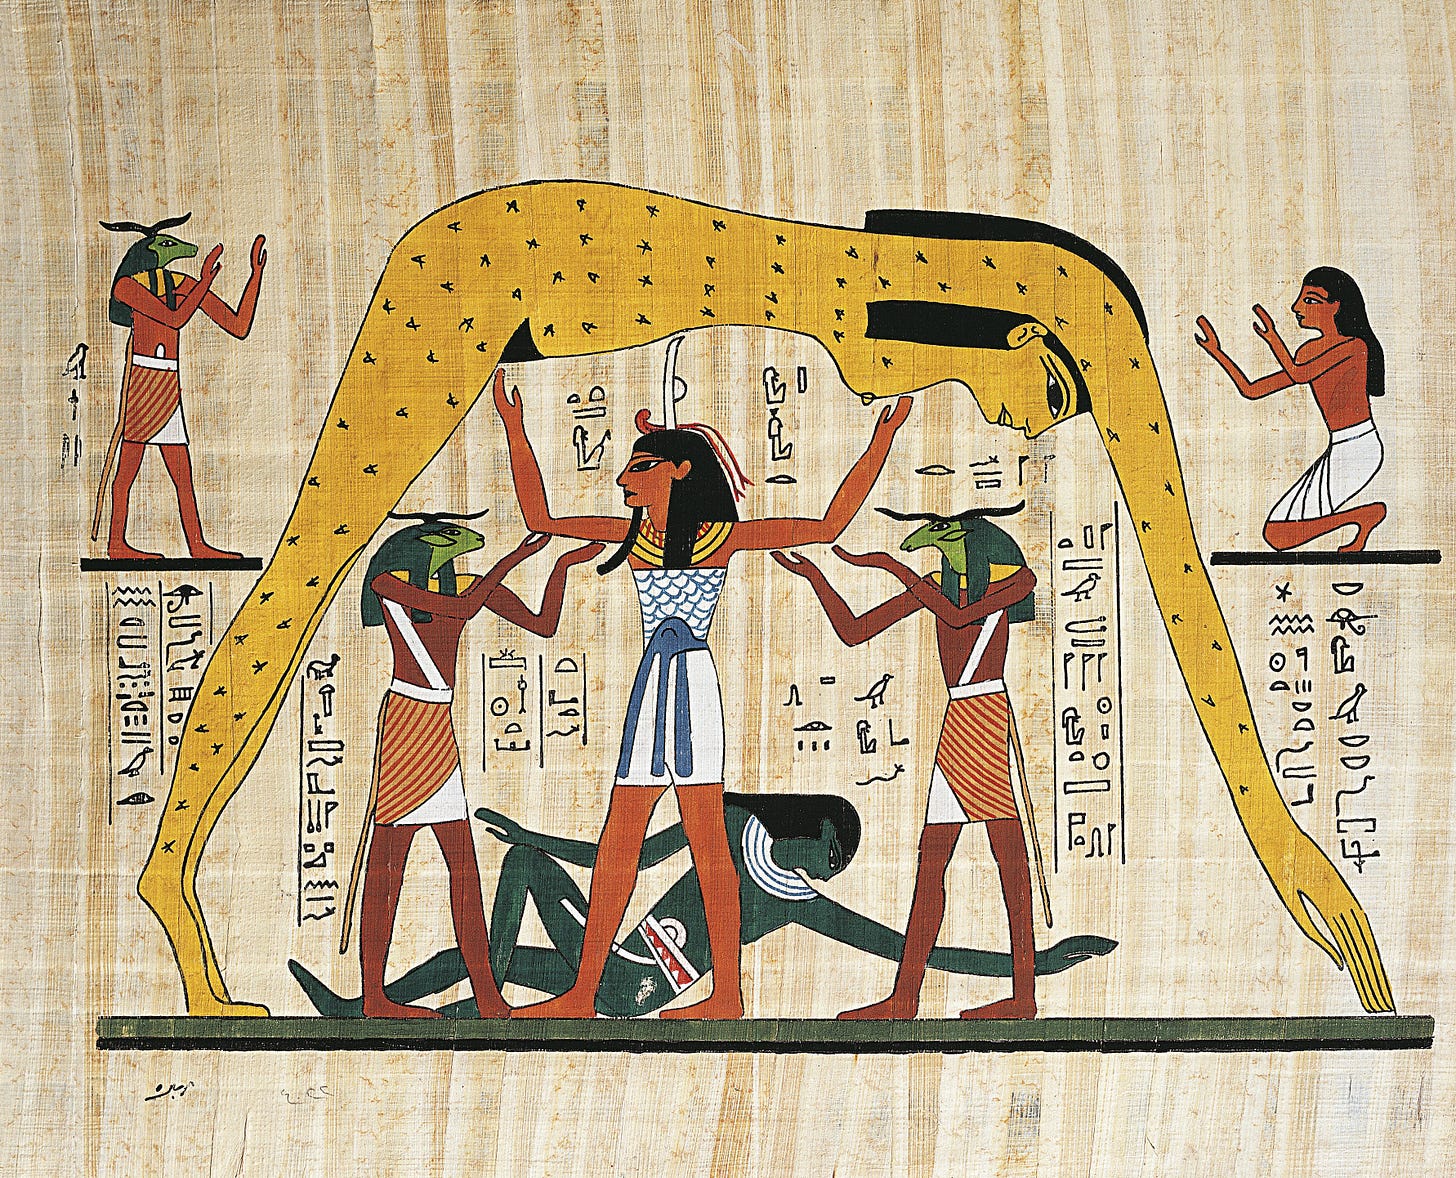 Exciting' New Insight Into Ancient Egyptian Astronomy and Mythology